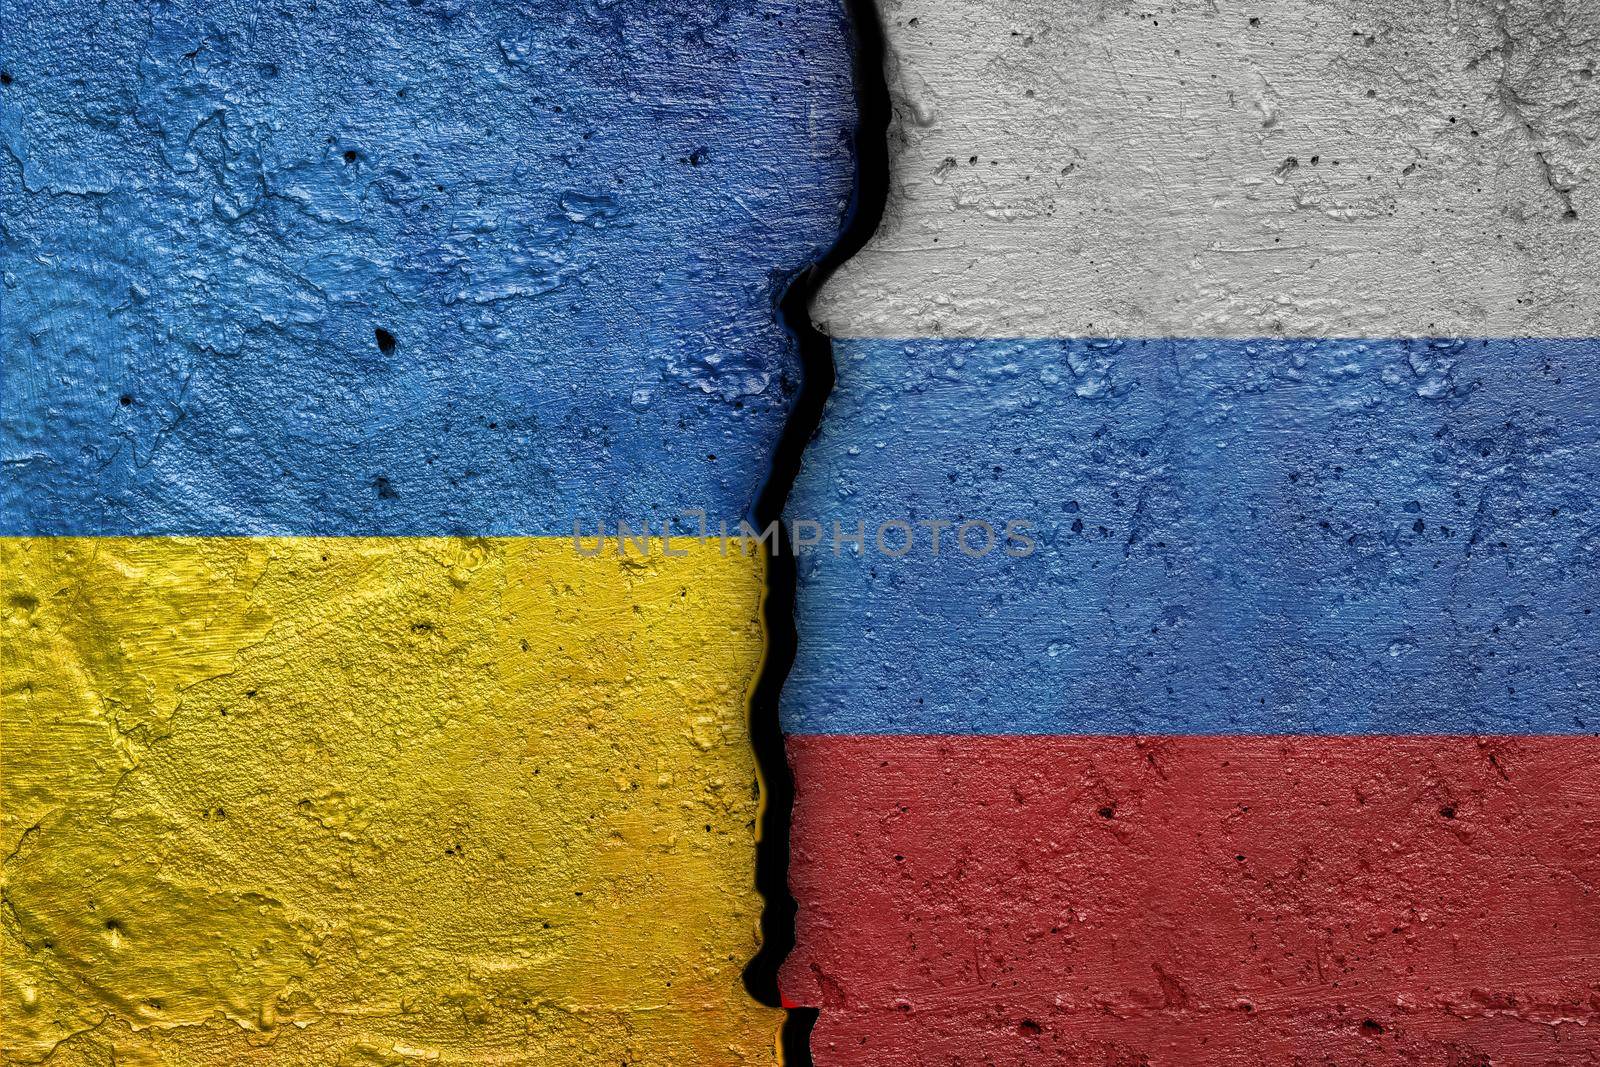 Ukraine and Russia - Cracked concrete wall painted with a Ukrainian flag on the left and a Russian flag on the right stock photo by adamr